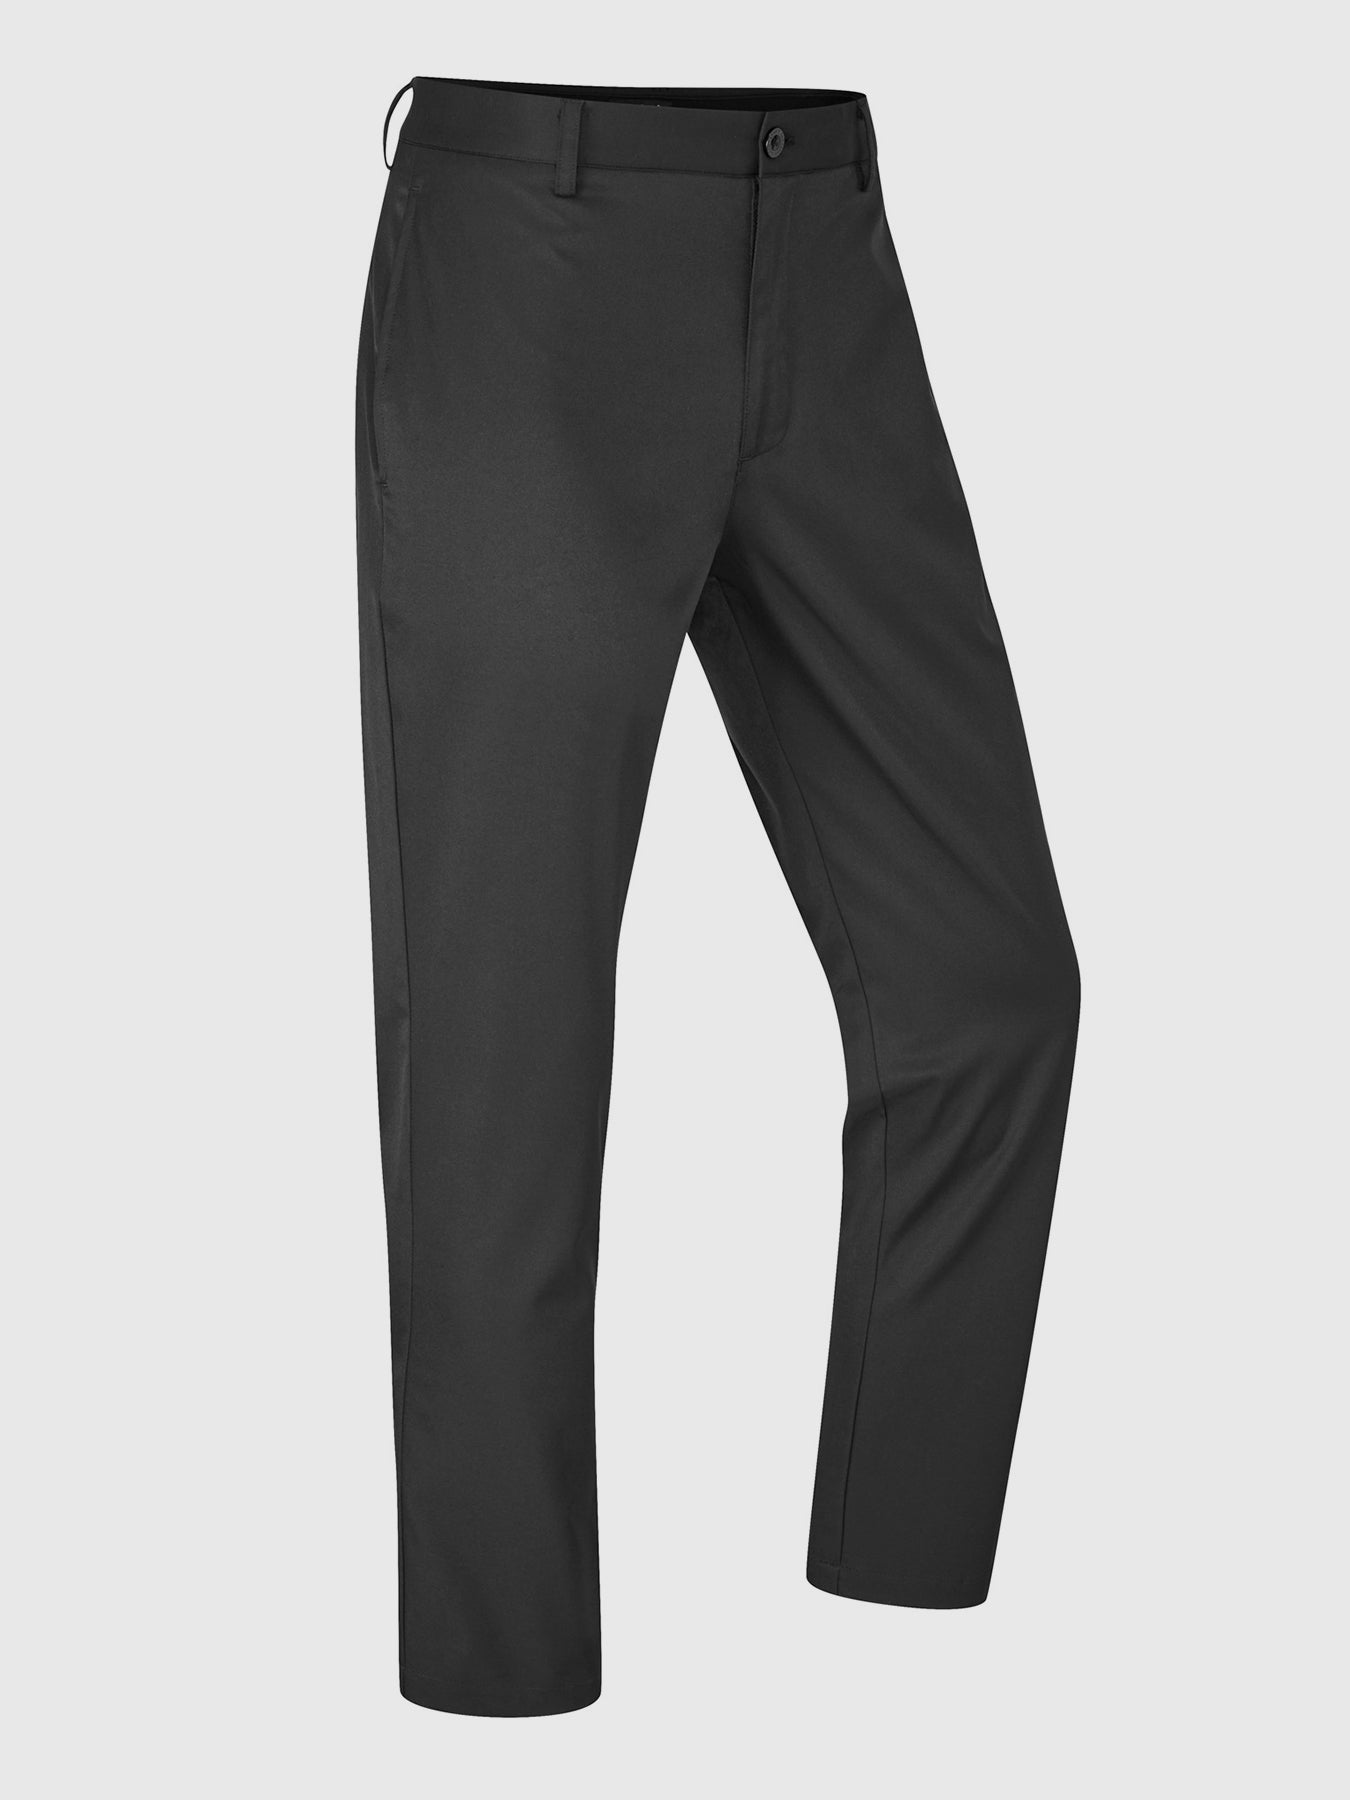 View Jonah Performance Piped Golf Trousers In Black information